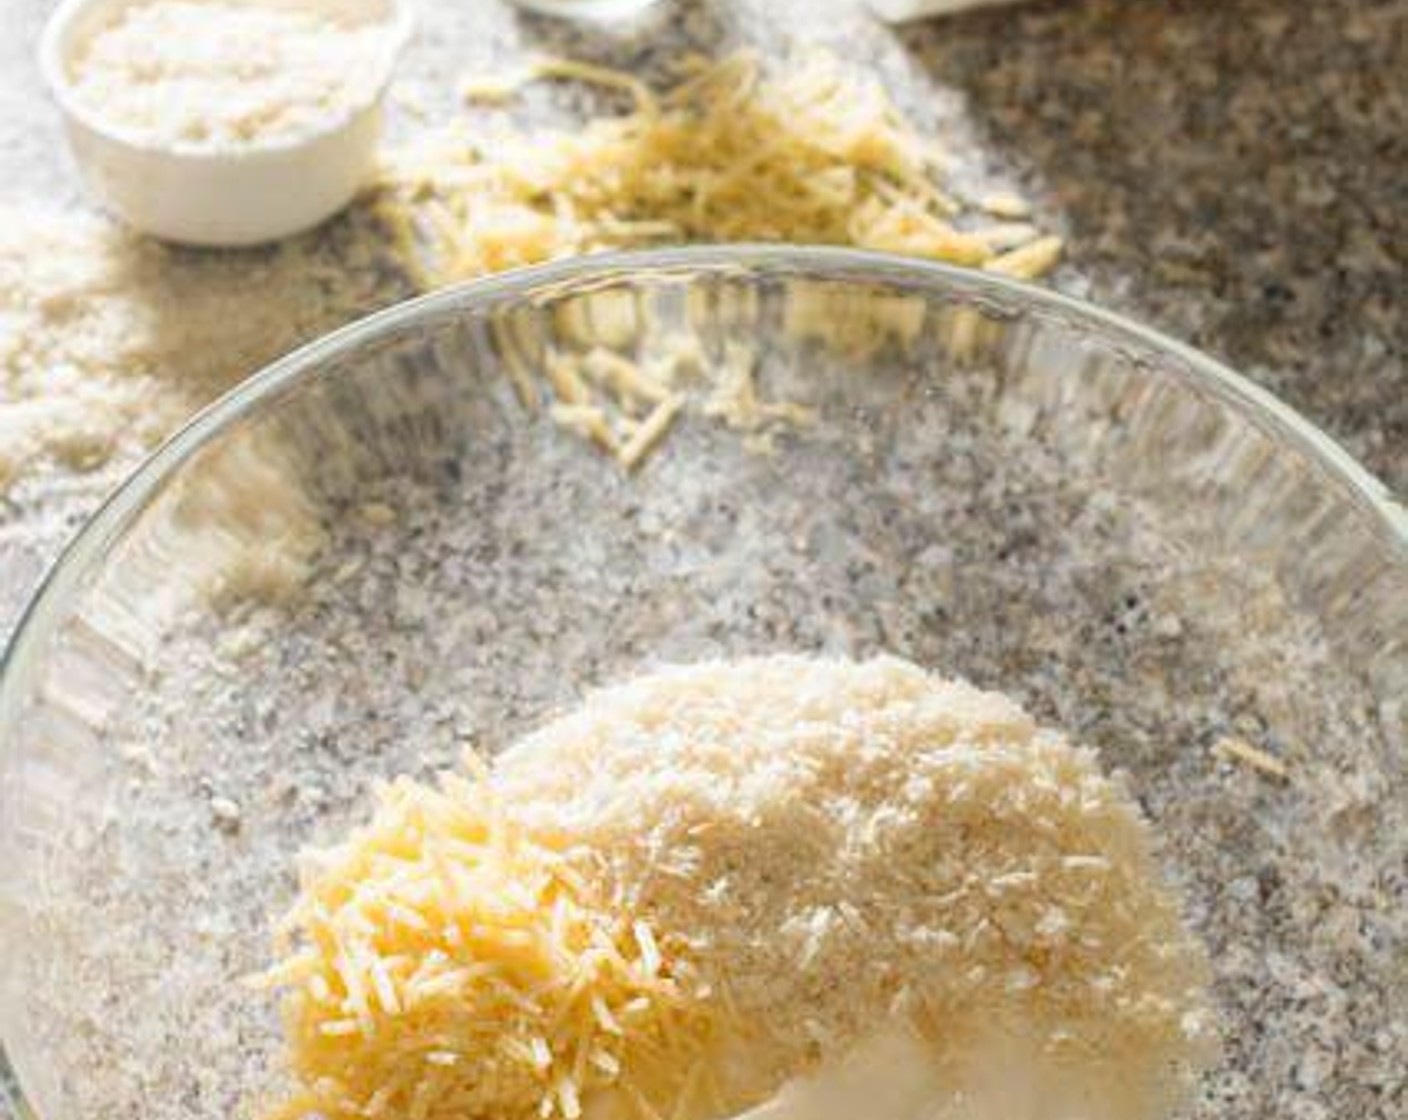 step 3 Combine Mayonnaise (1/2 cup), Parmesan Cheese (1/4 cup), Panko Breadcrumbs (1/4 cup) and McCormick® Garlic Powder (1/2 tsp) in a mixing bowl. Stir well to combine these ingredients.